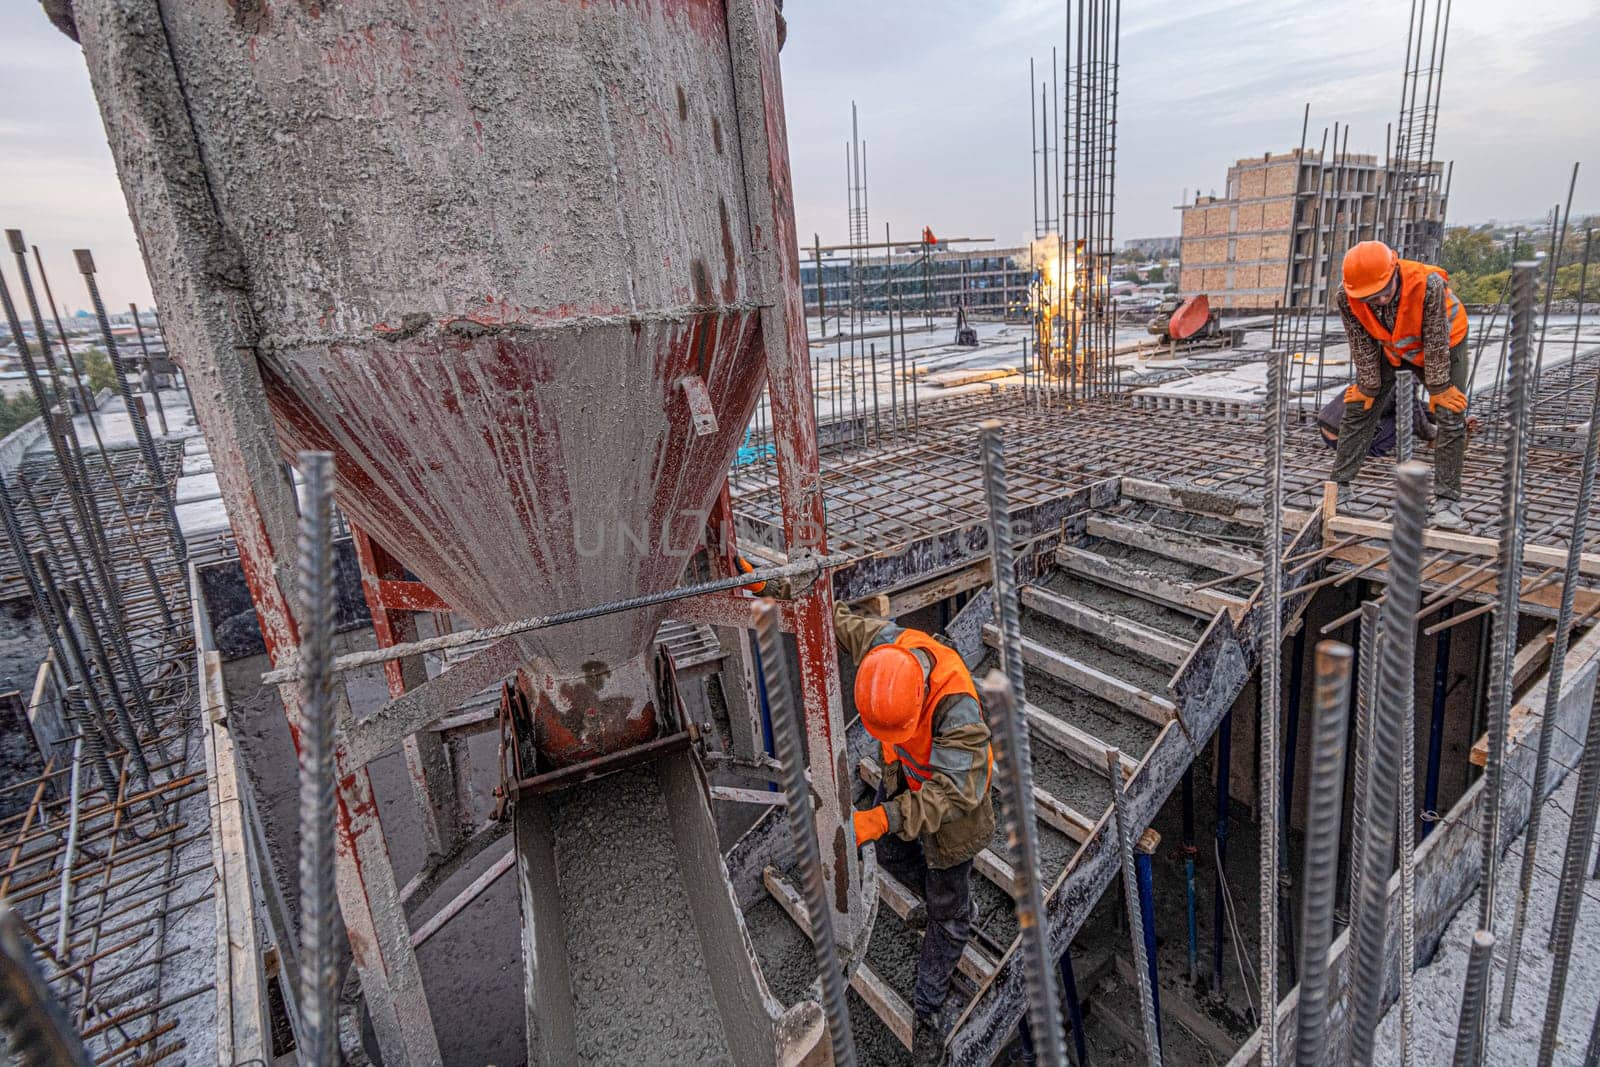 The workers on a building infrastructure roof with machinery and tools. Pouring concrete into a mold